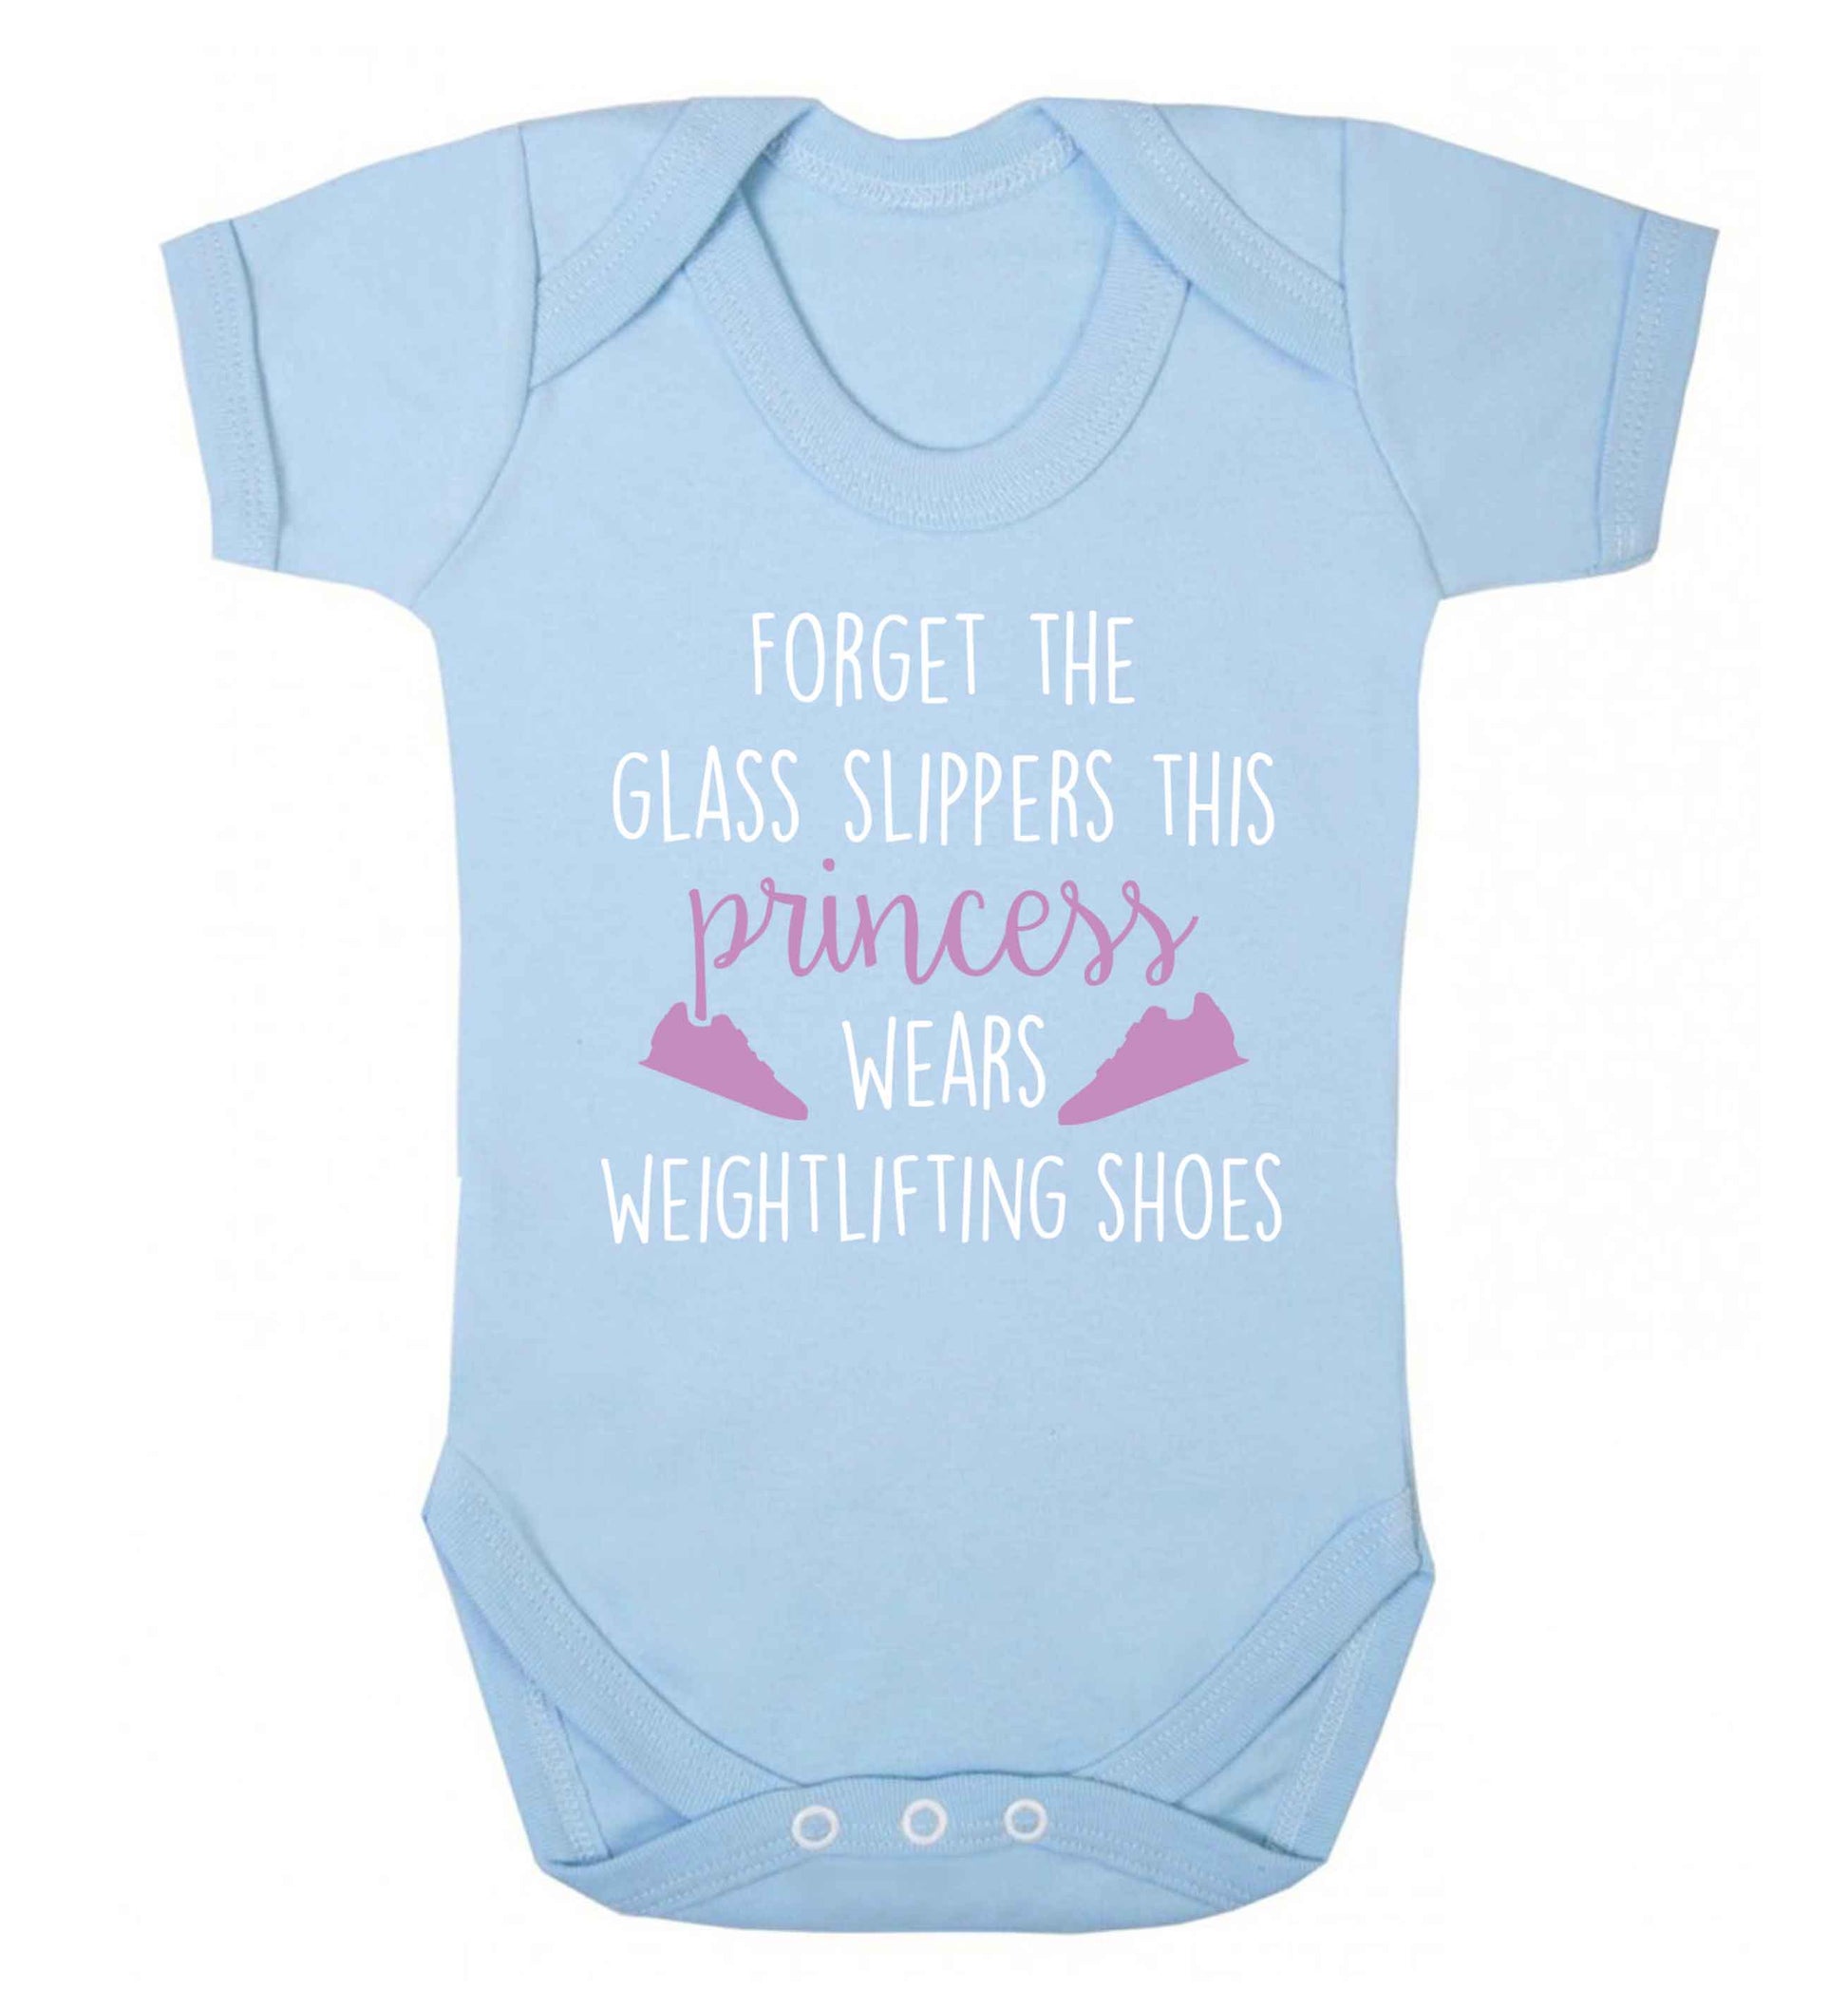 Forget the glass slippers this princess wears weightlifting shoes Baby Vest pale blue 18-24 months